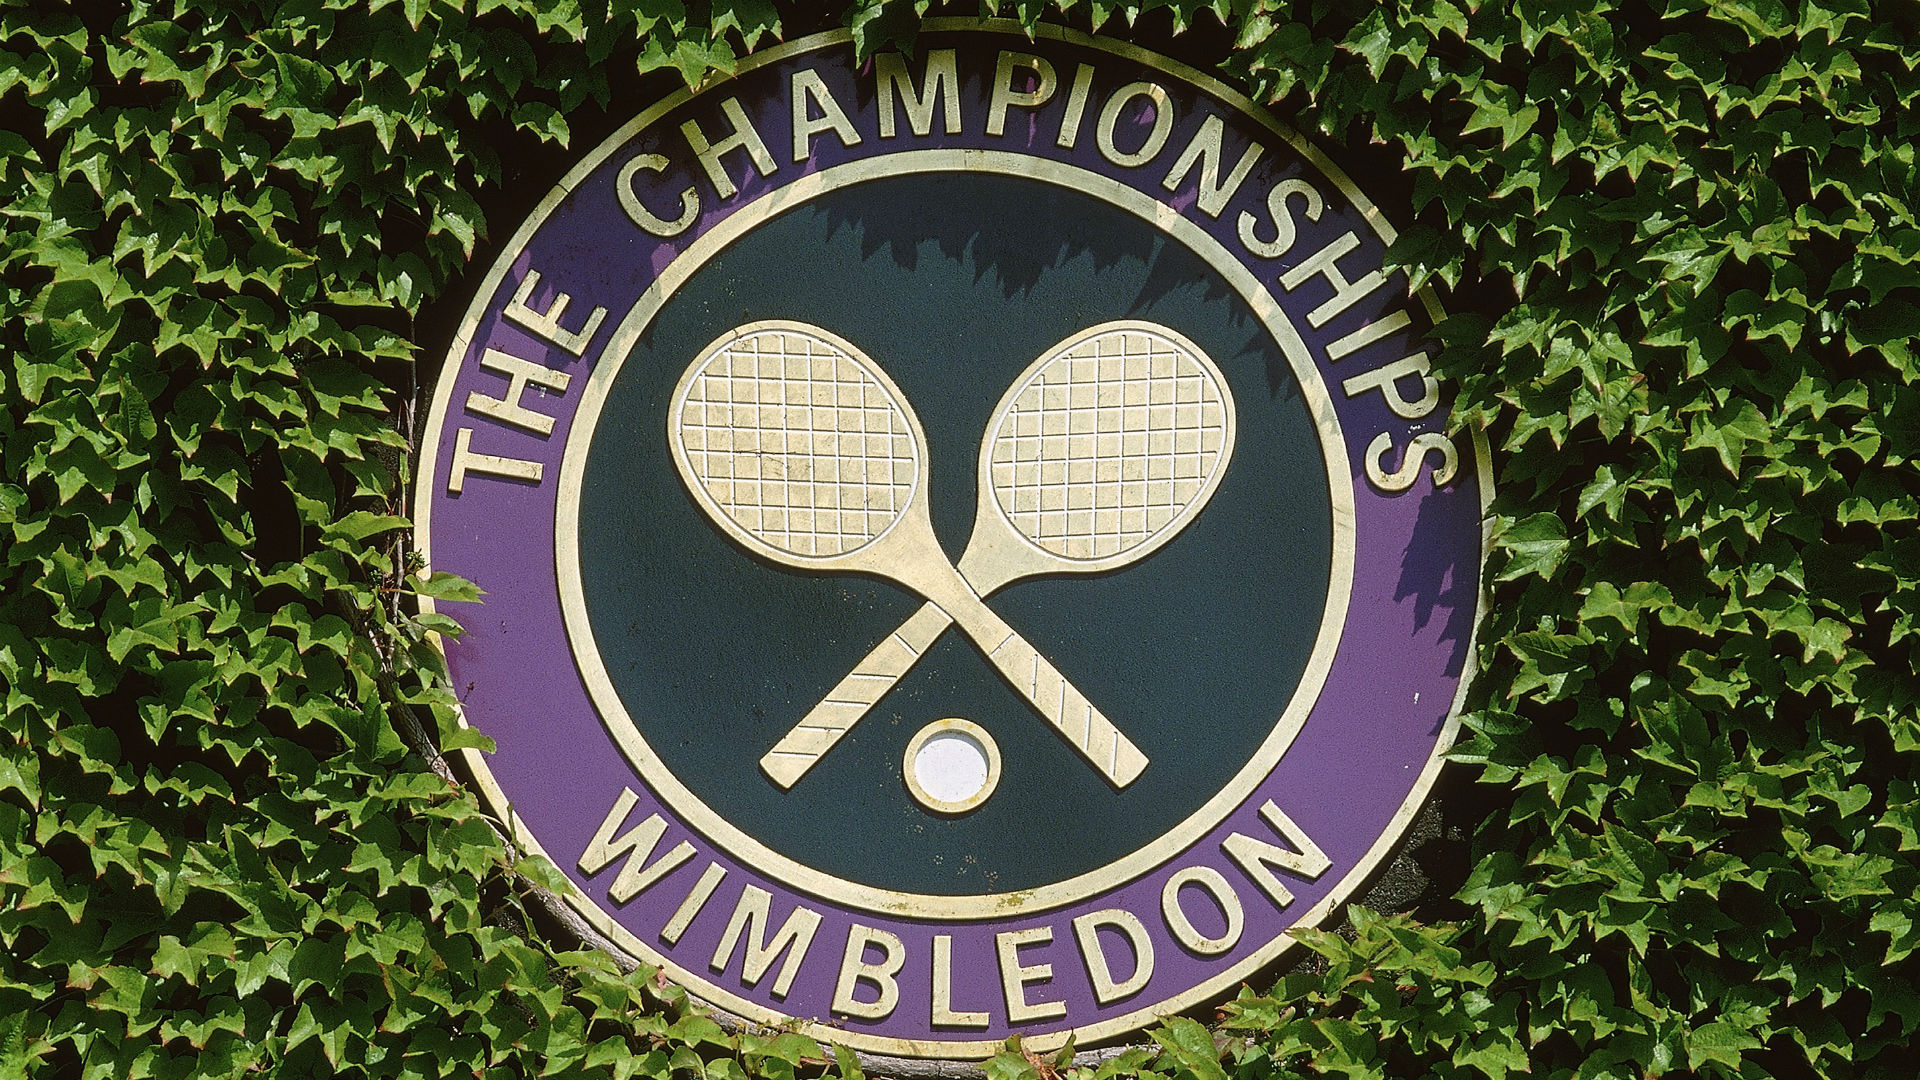 Wimbledon 2019 schedule: TV channels, dates, times for every match at All England Club ...1920 x 1080